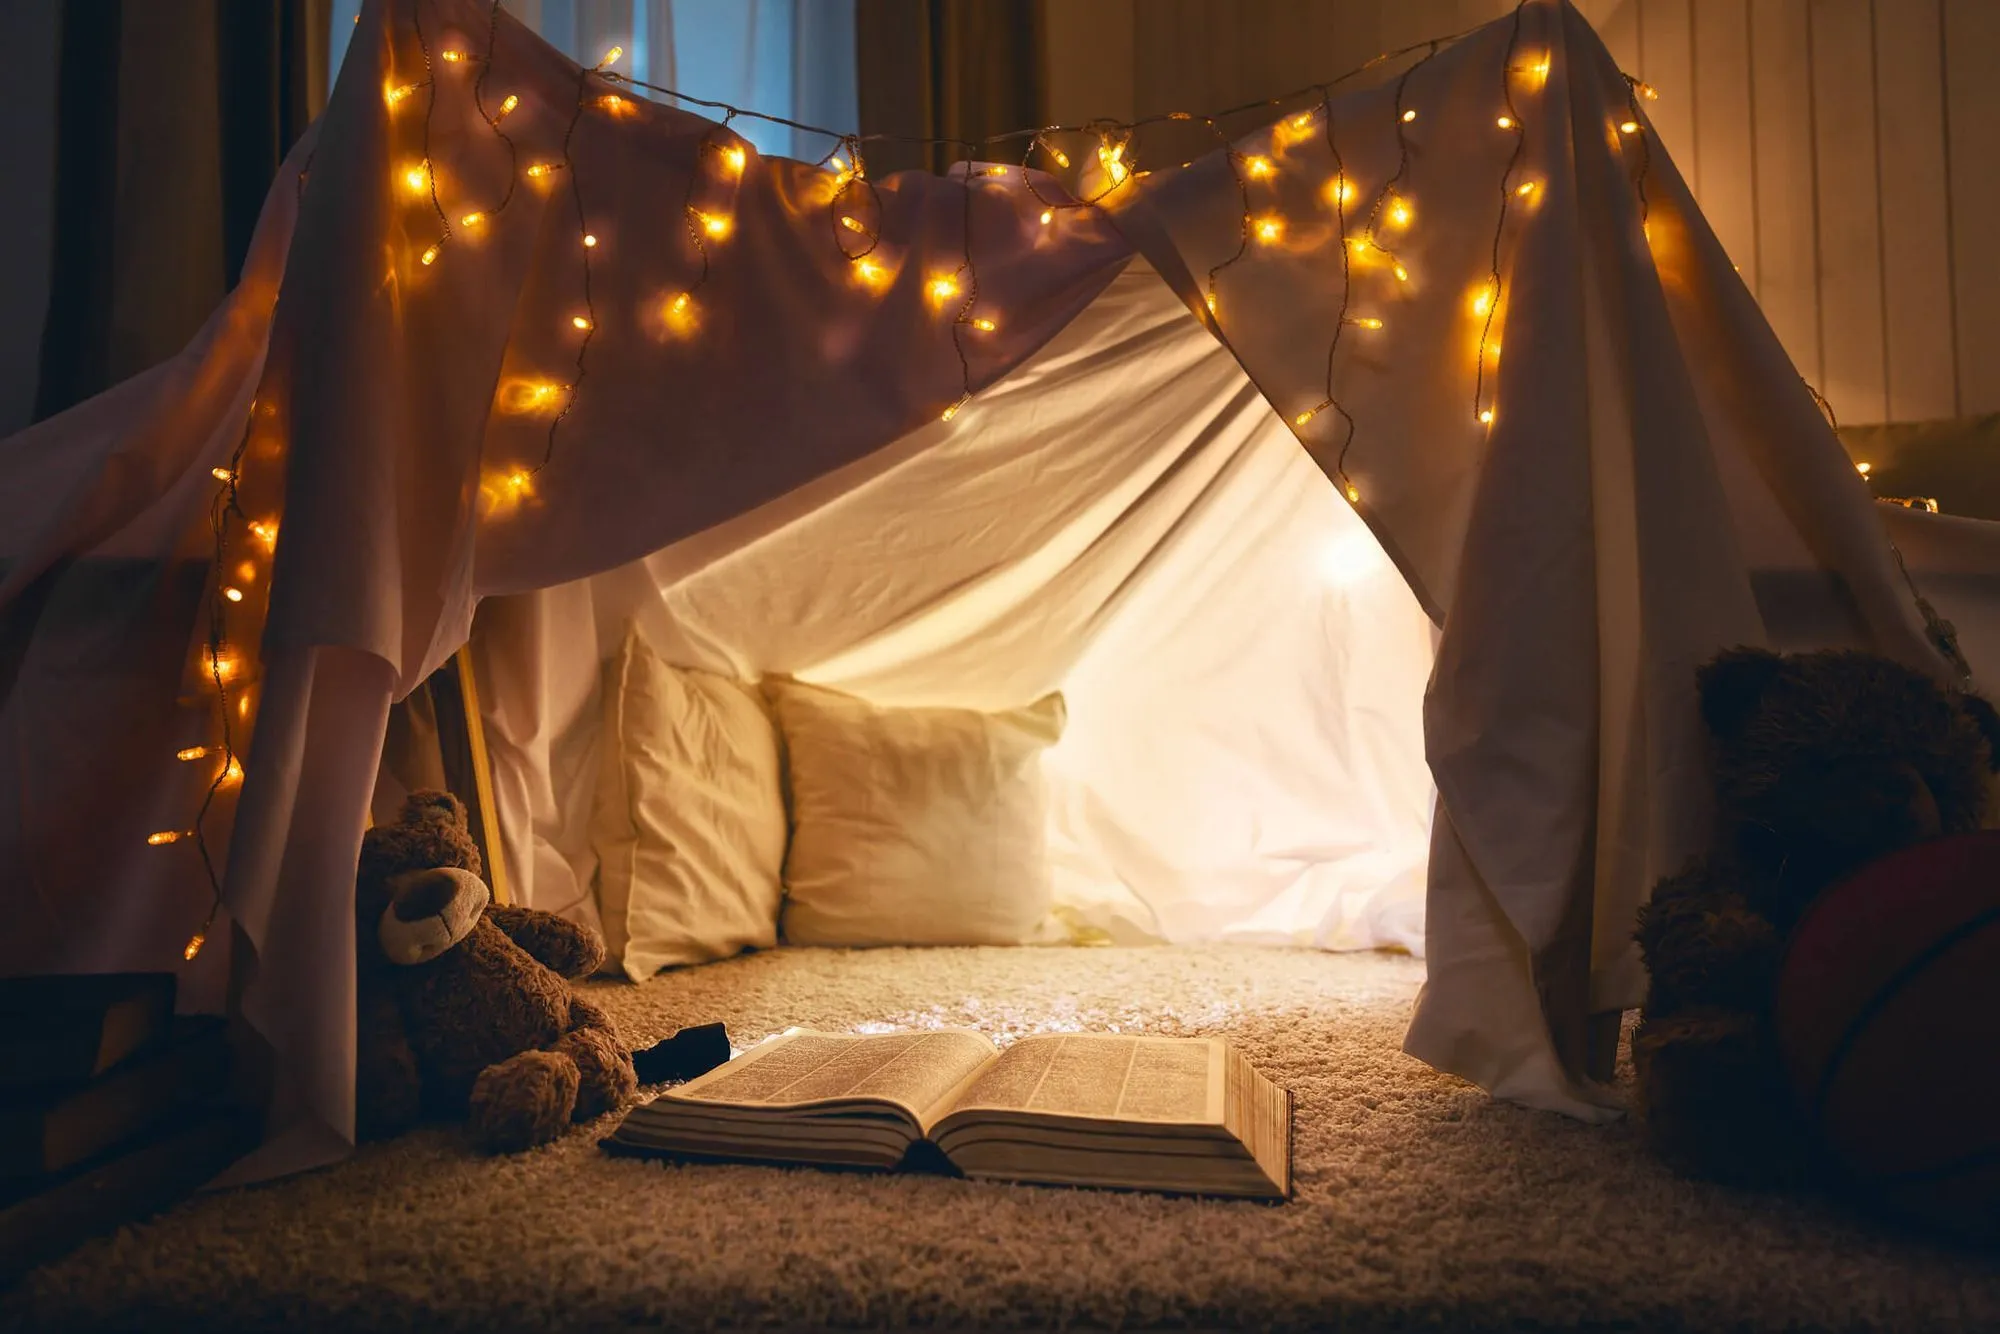 Set up a reading den in your living room, complete with fairy lights and cosy blankets.